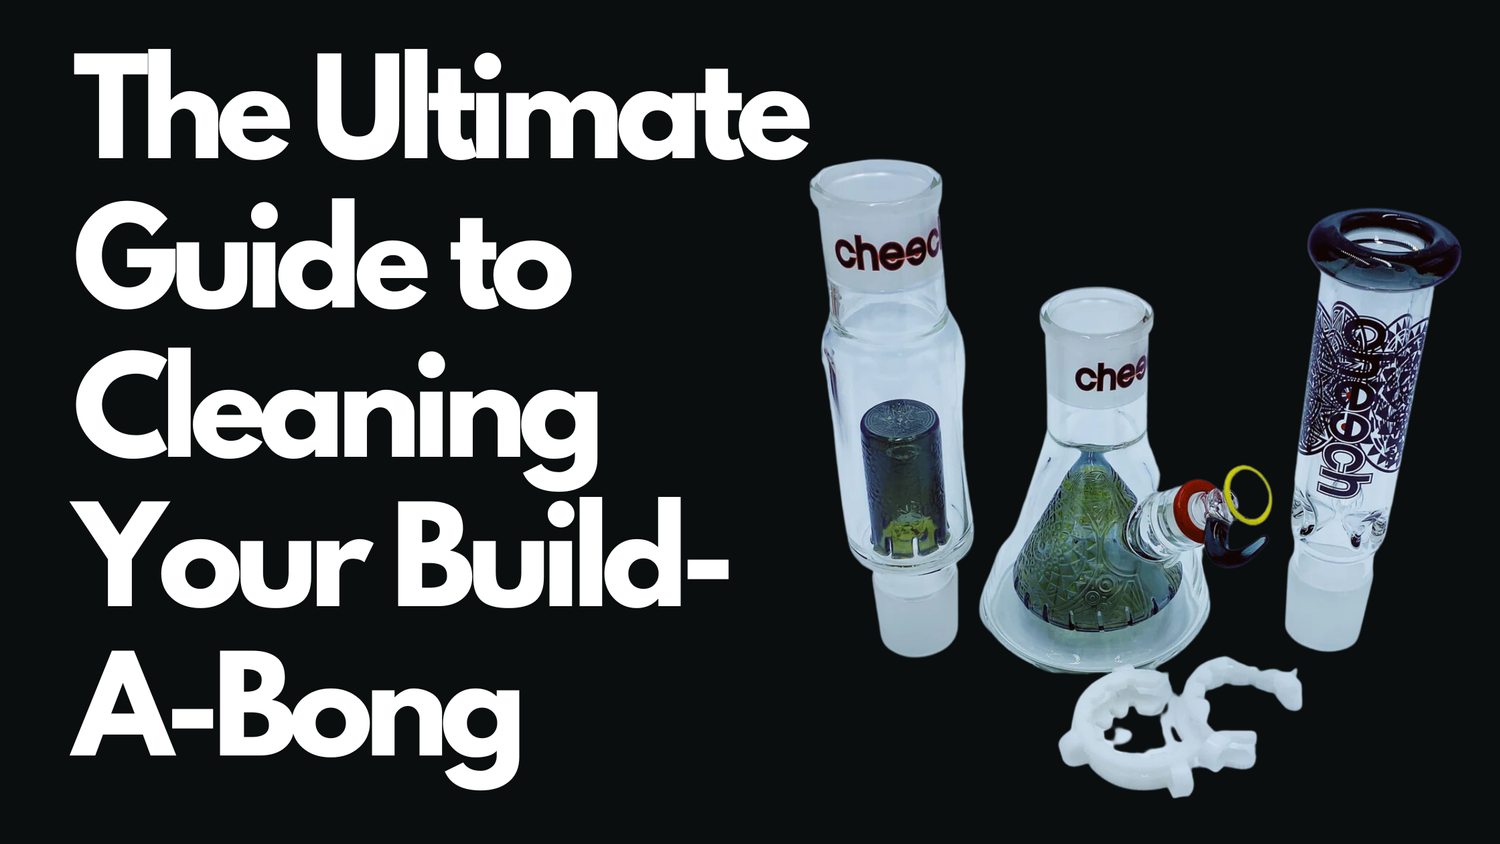 The Ultimate Guide to Cleaning Your Build-A-Bong — The Bong